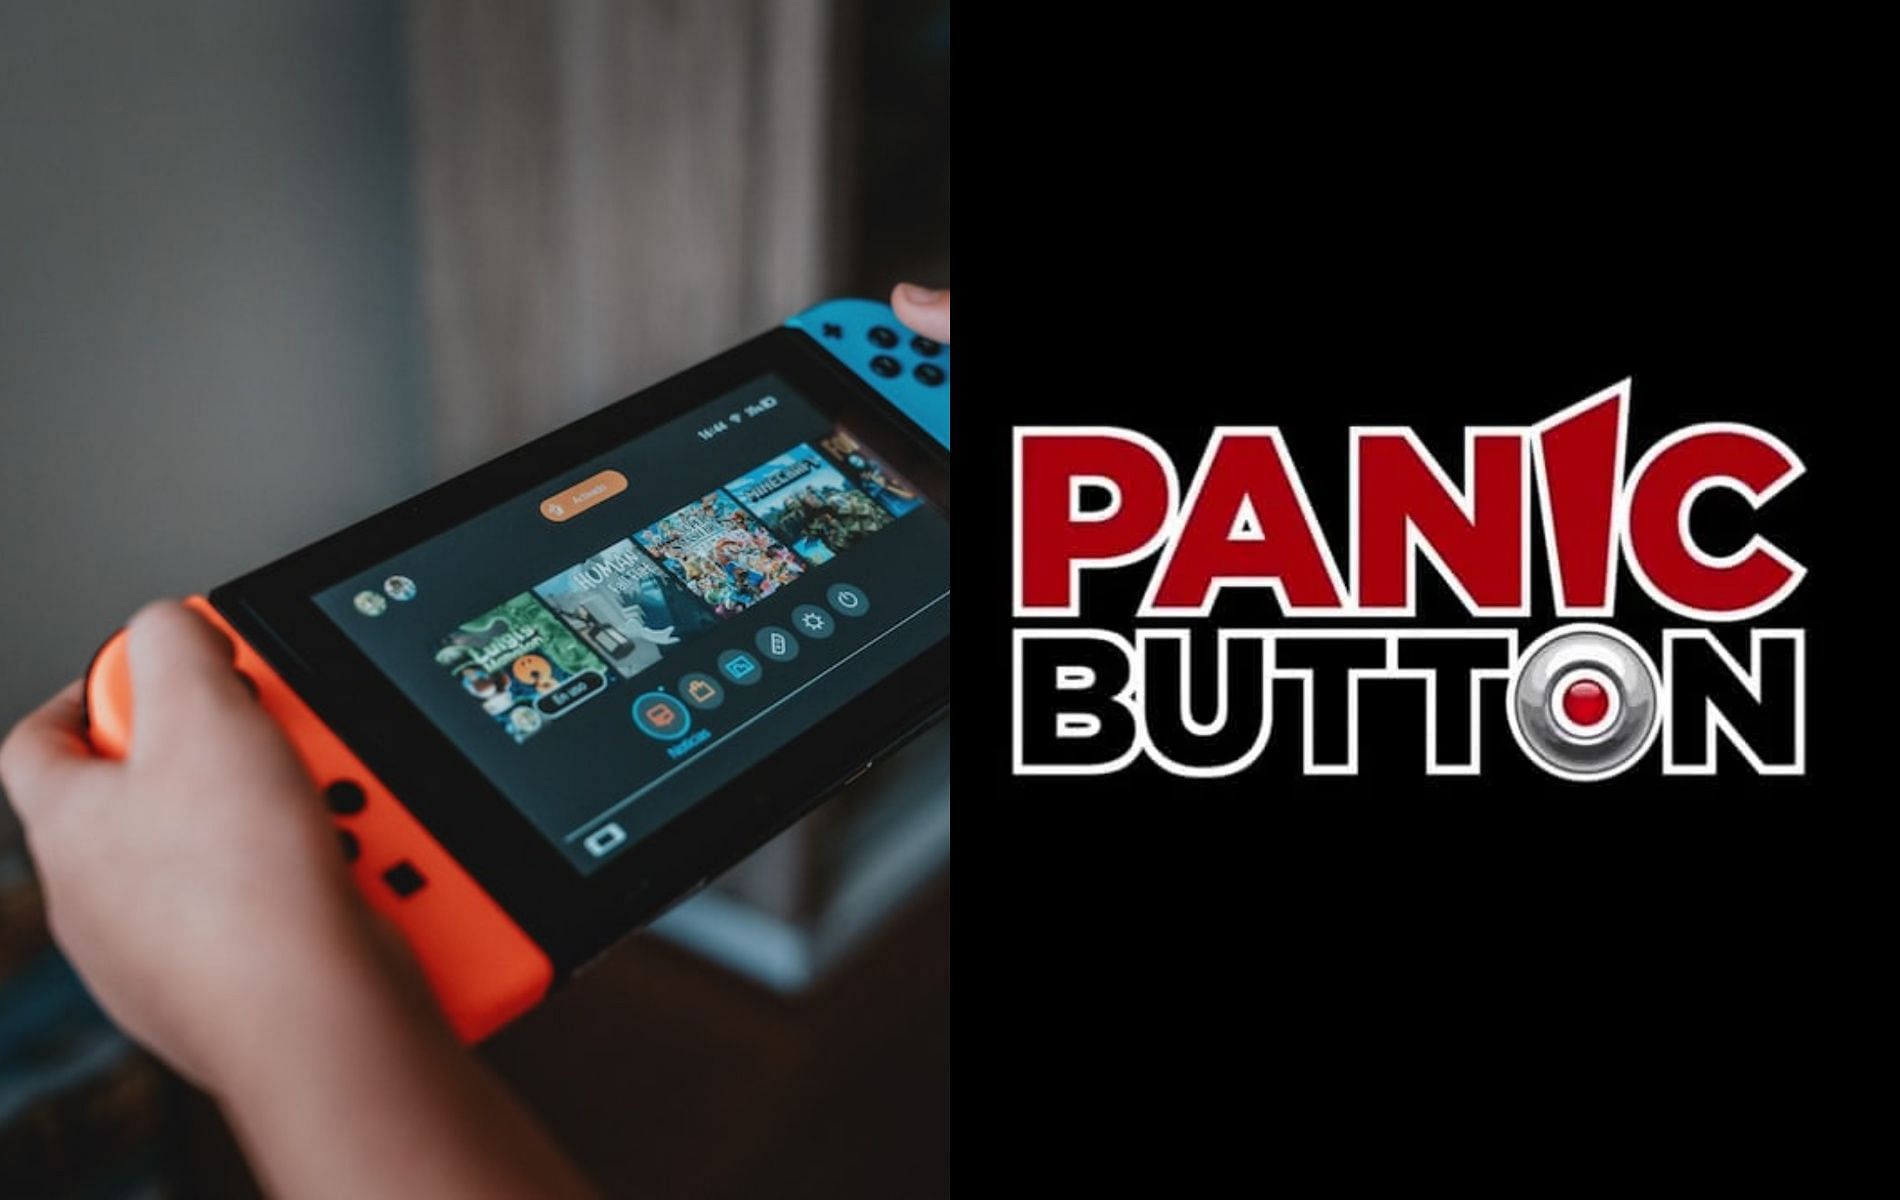 Cover art featuring Nintendo Switch and official Panic Button logo